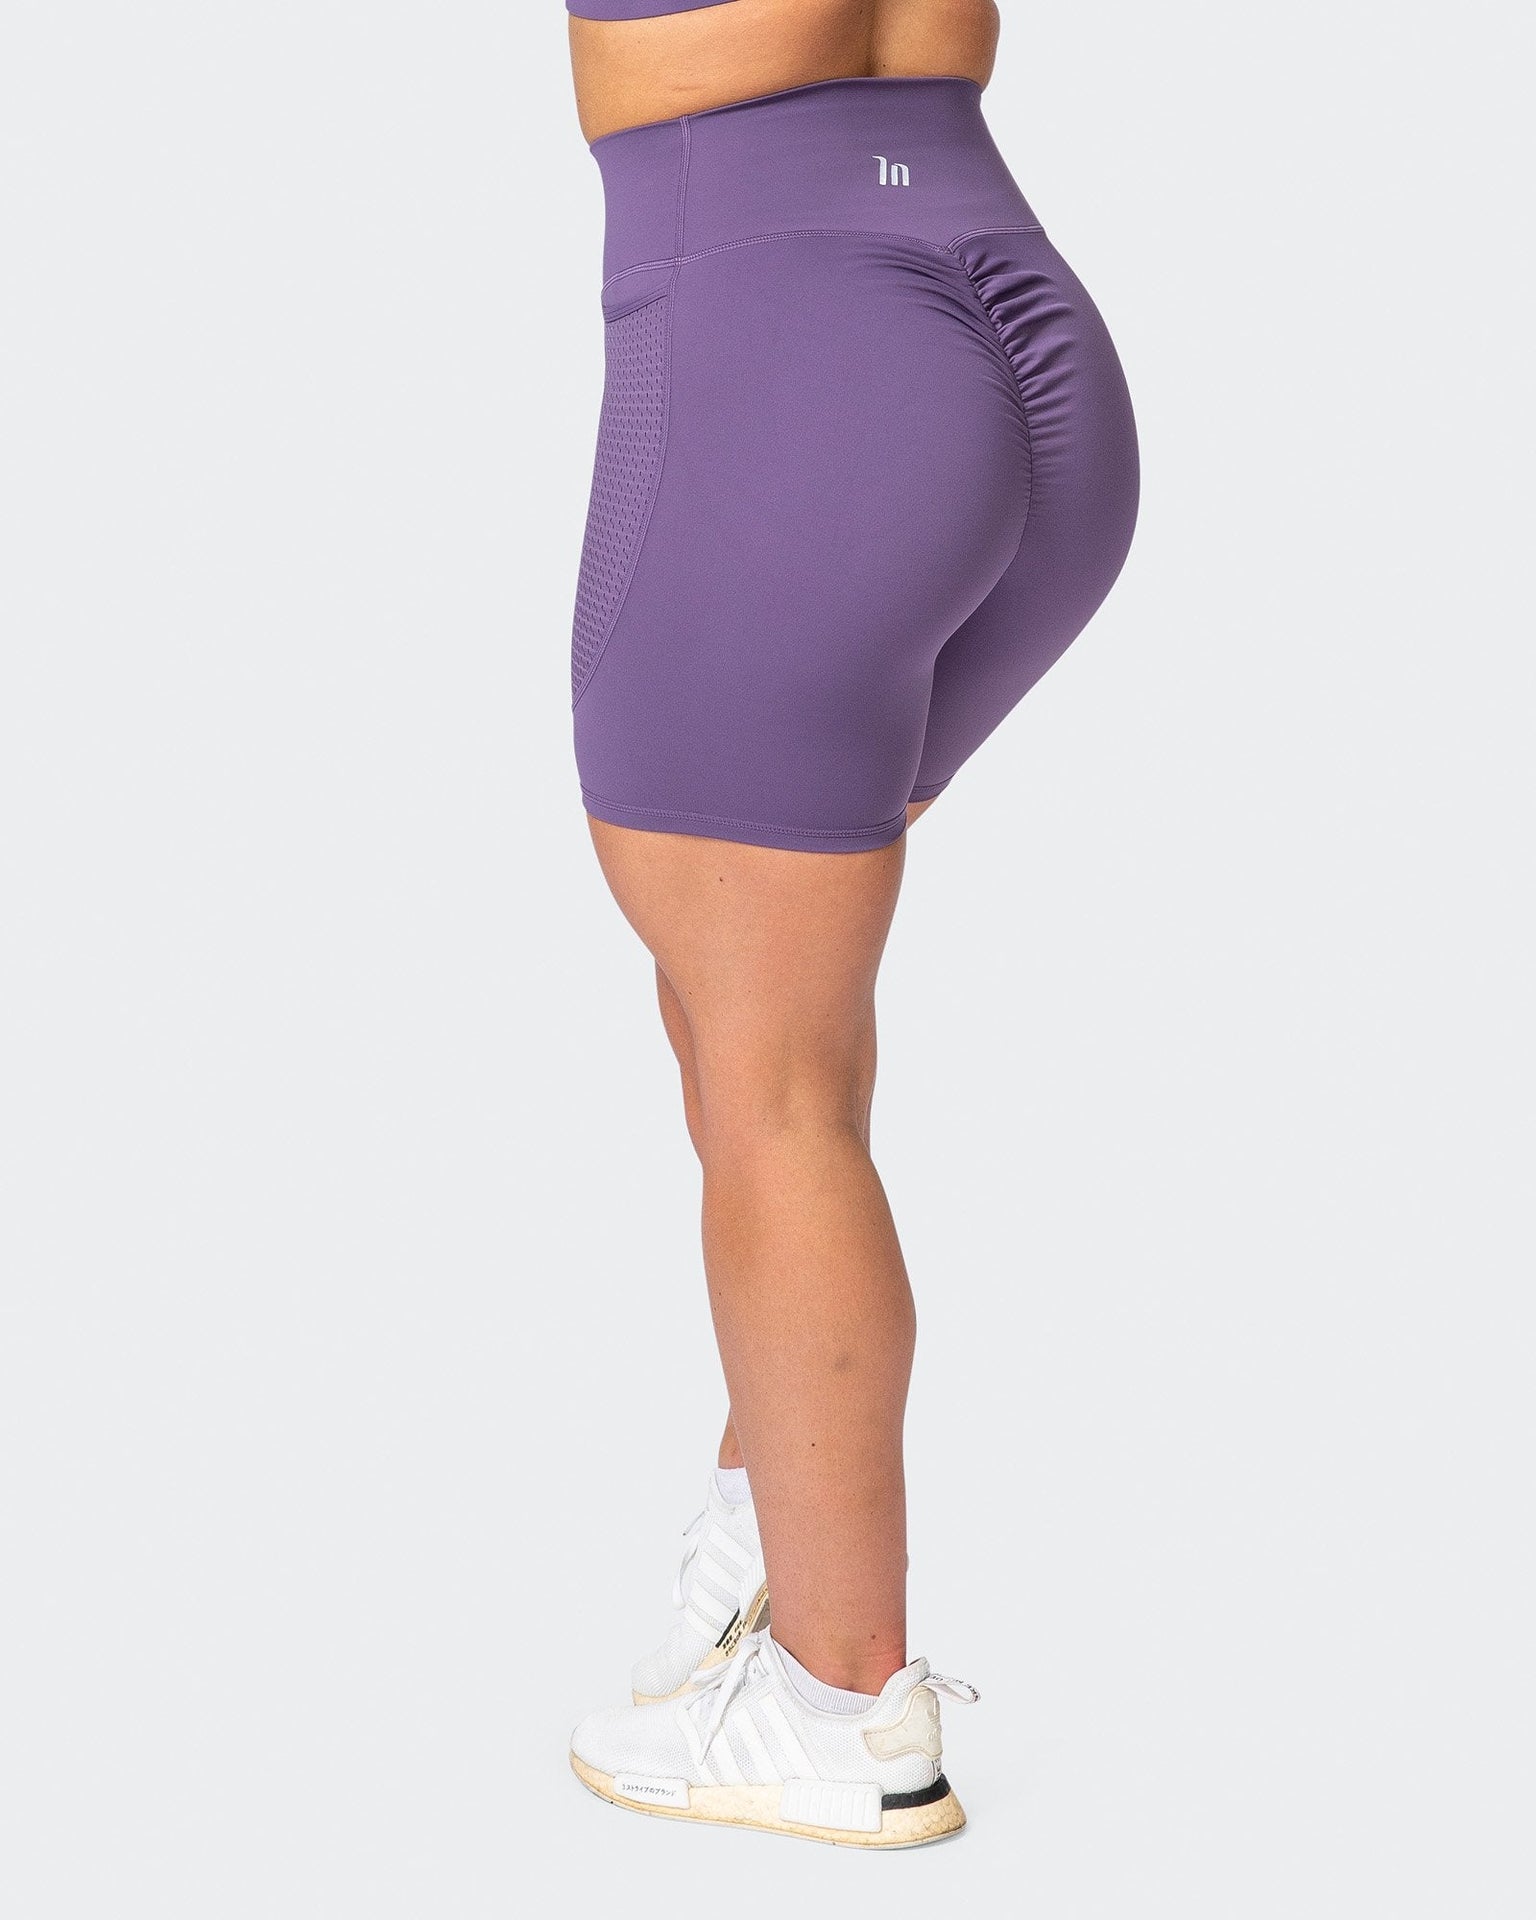 Women's Booty Shorts - Muscle Nation